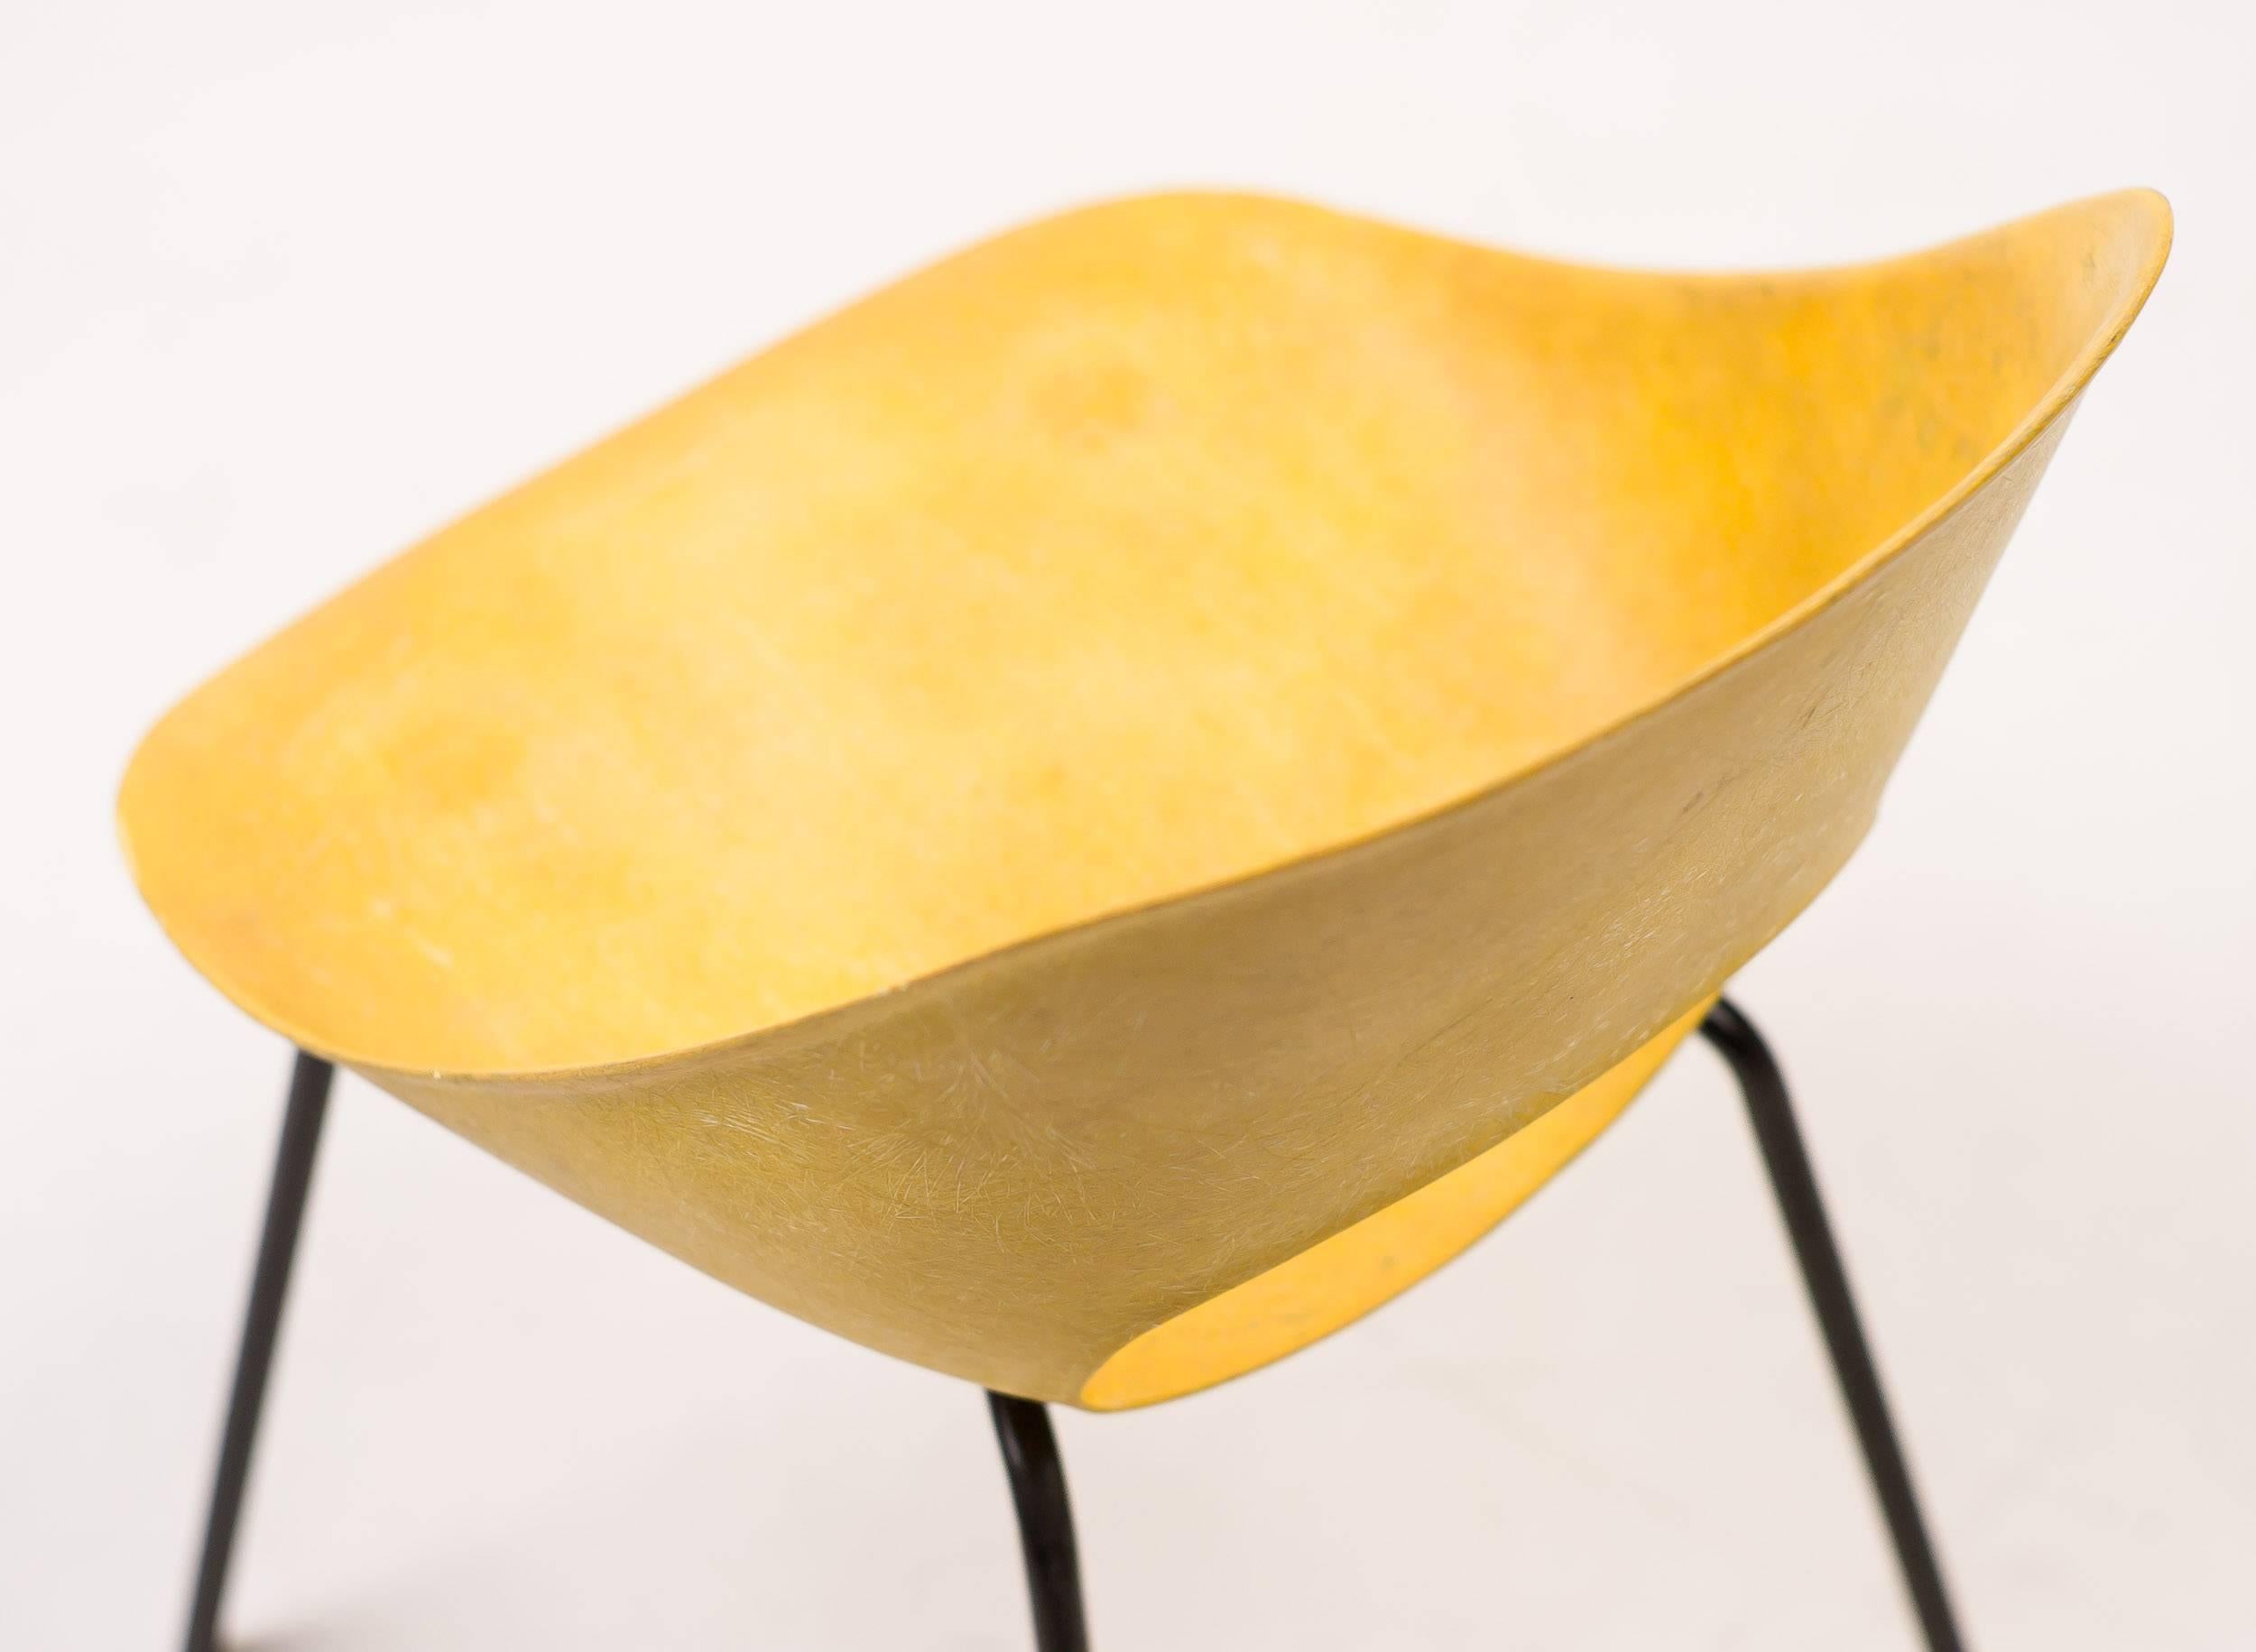 Great yellow fiberglass tulip chair designed by Pierre Guariche for Steiner.